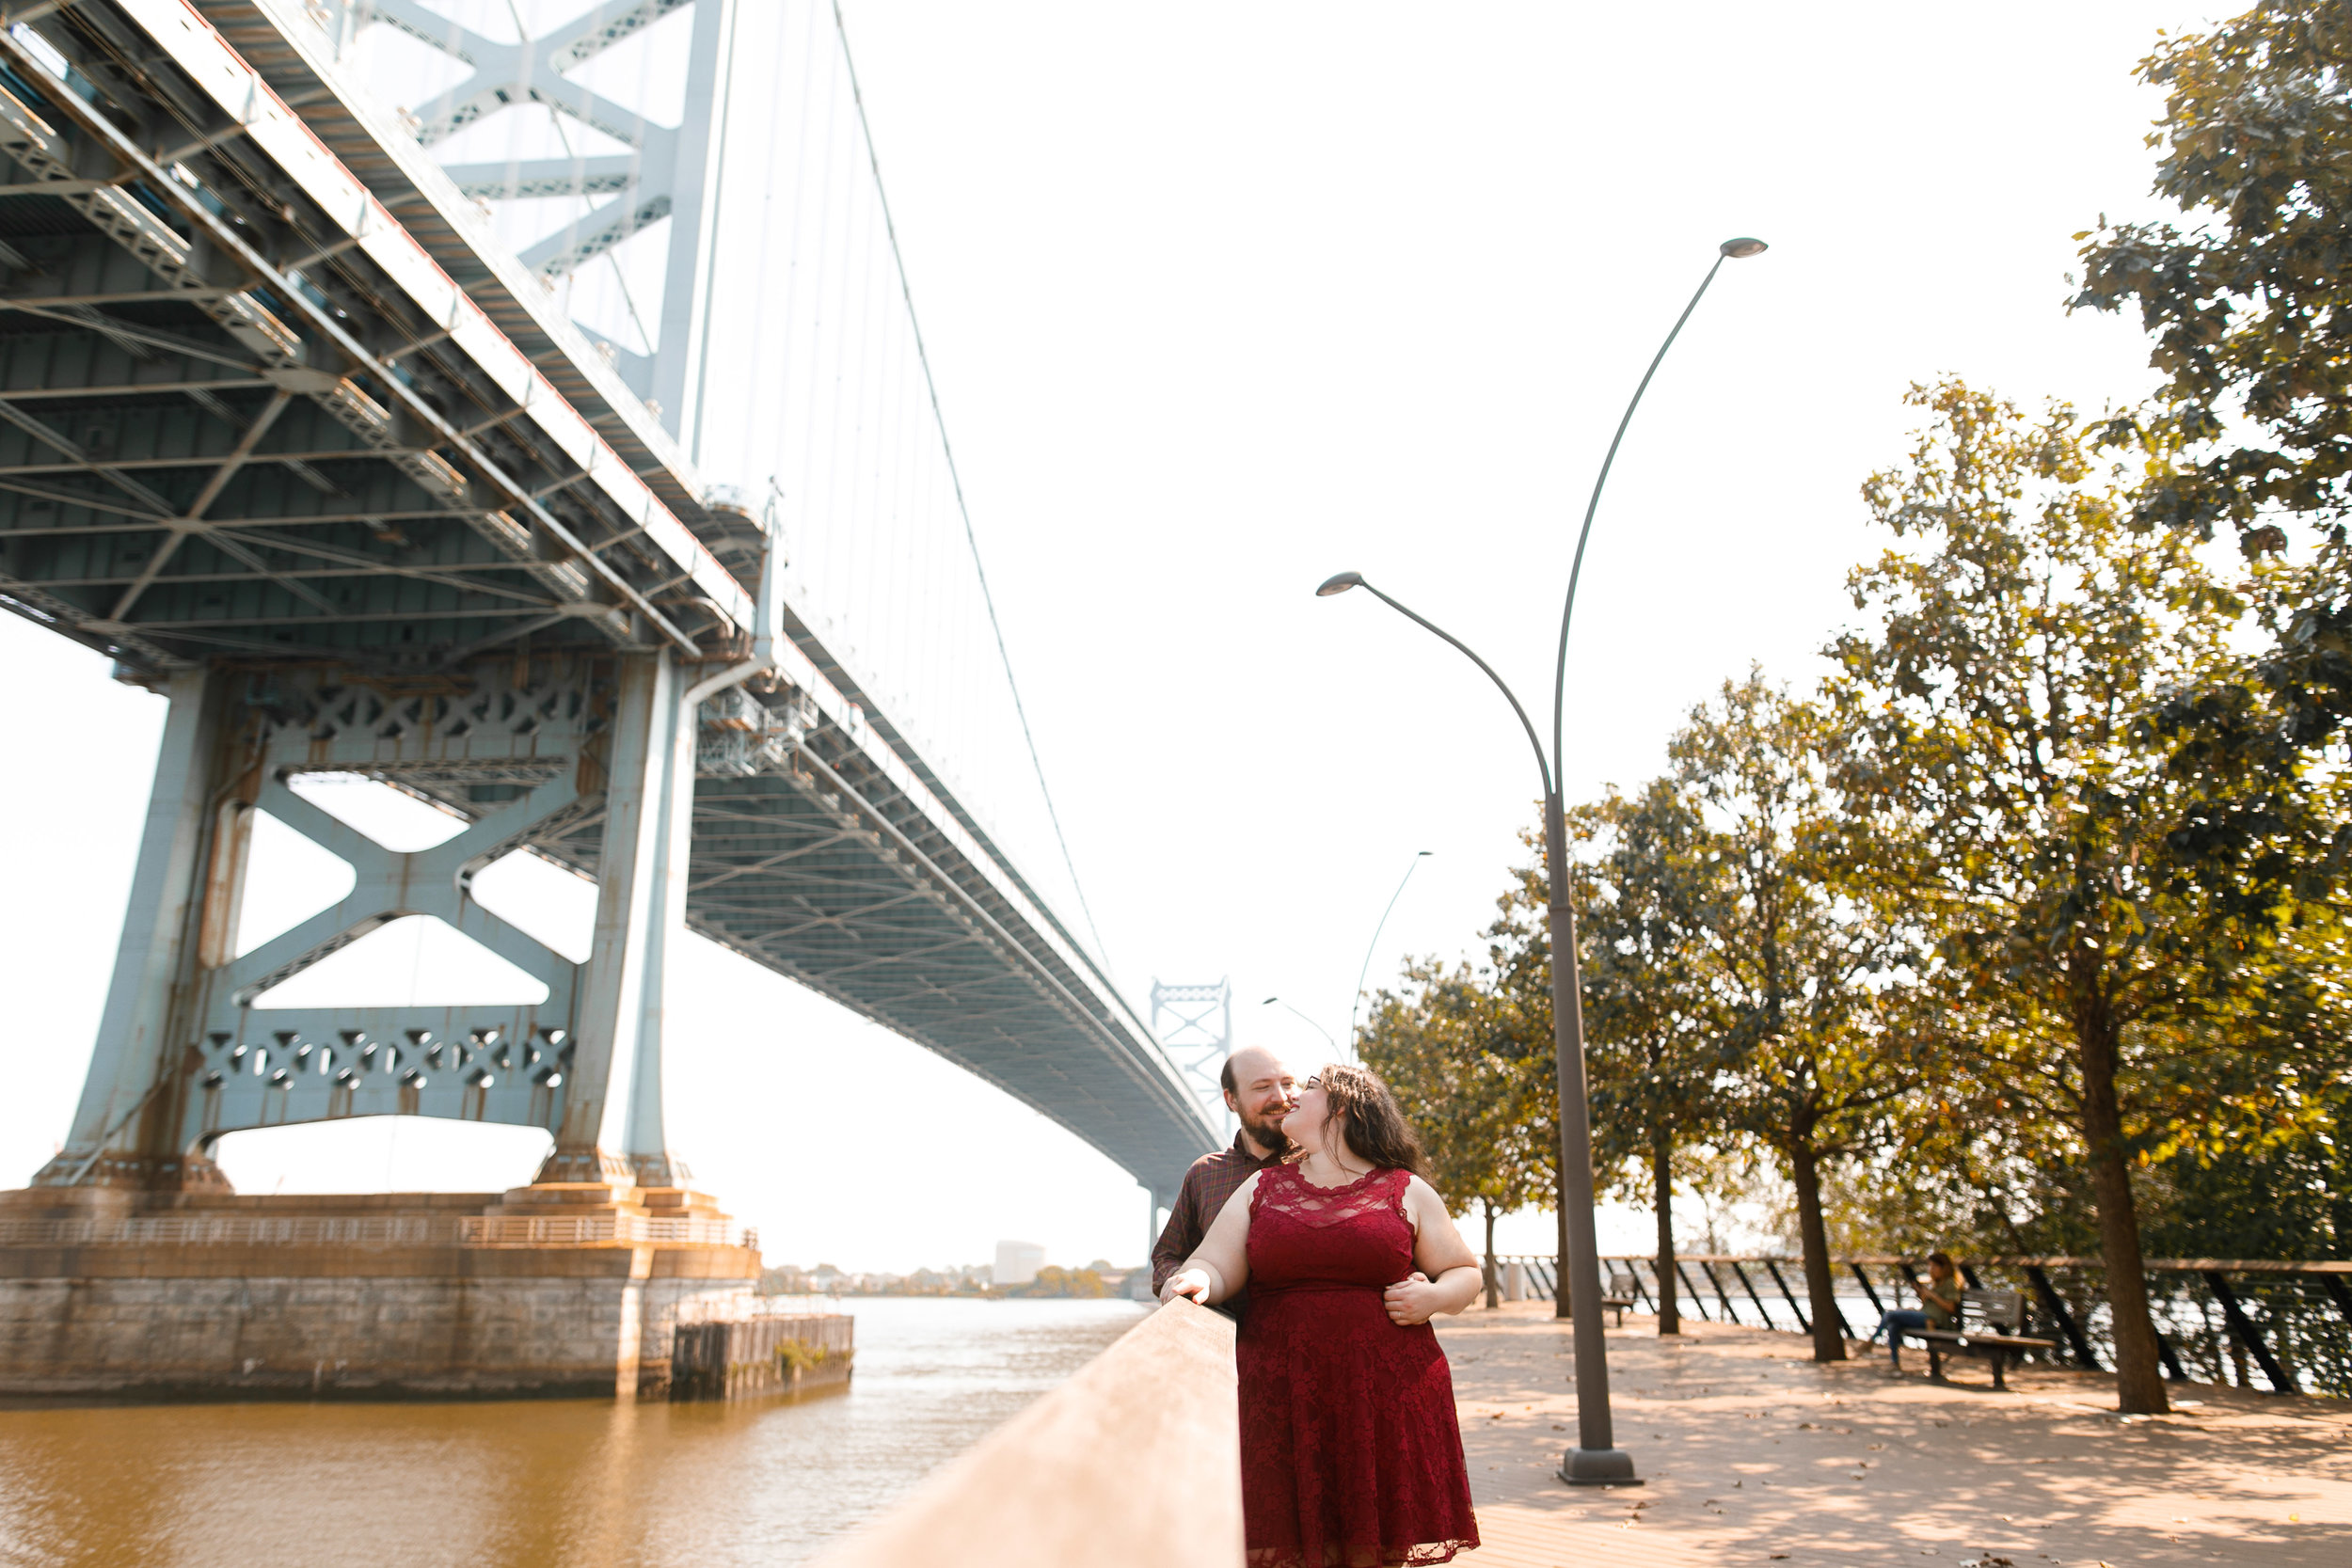 D&A Old City Philly Couples Session Photo Location Ideas 41.jpg